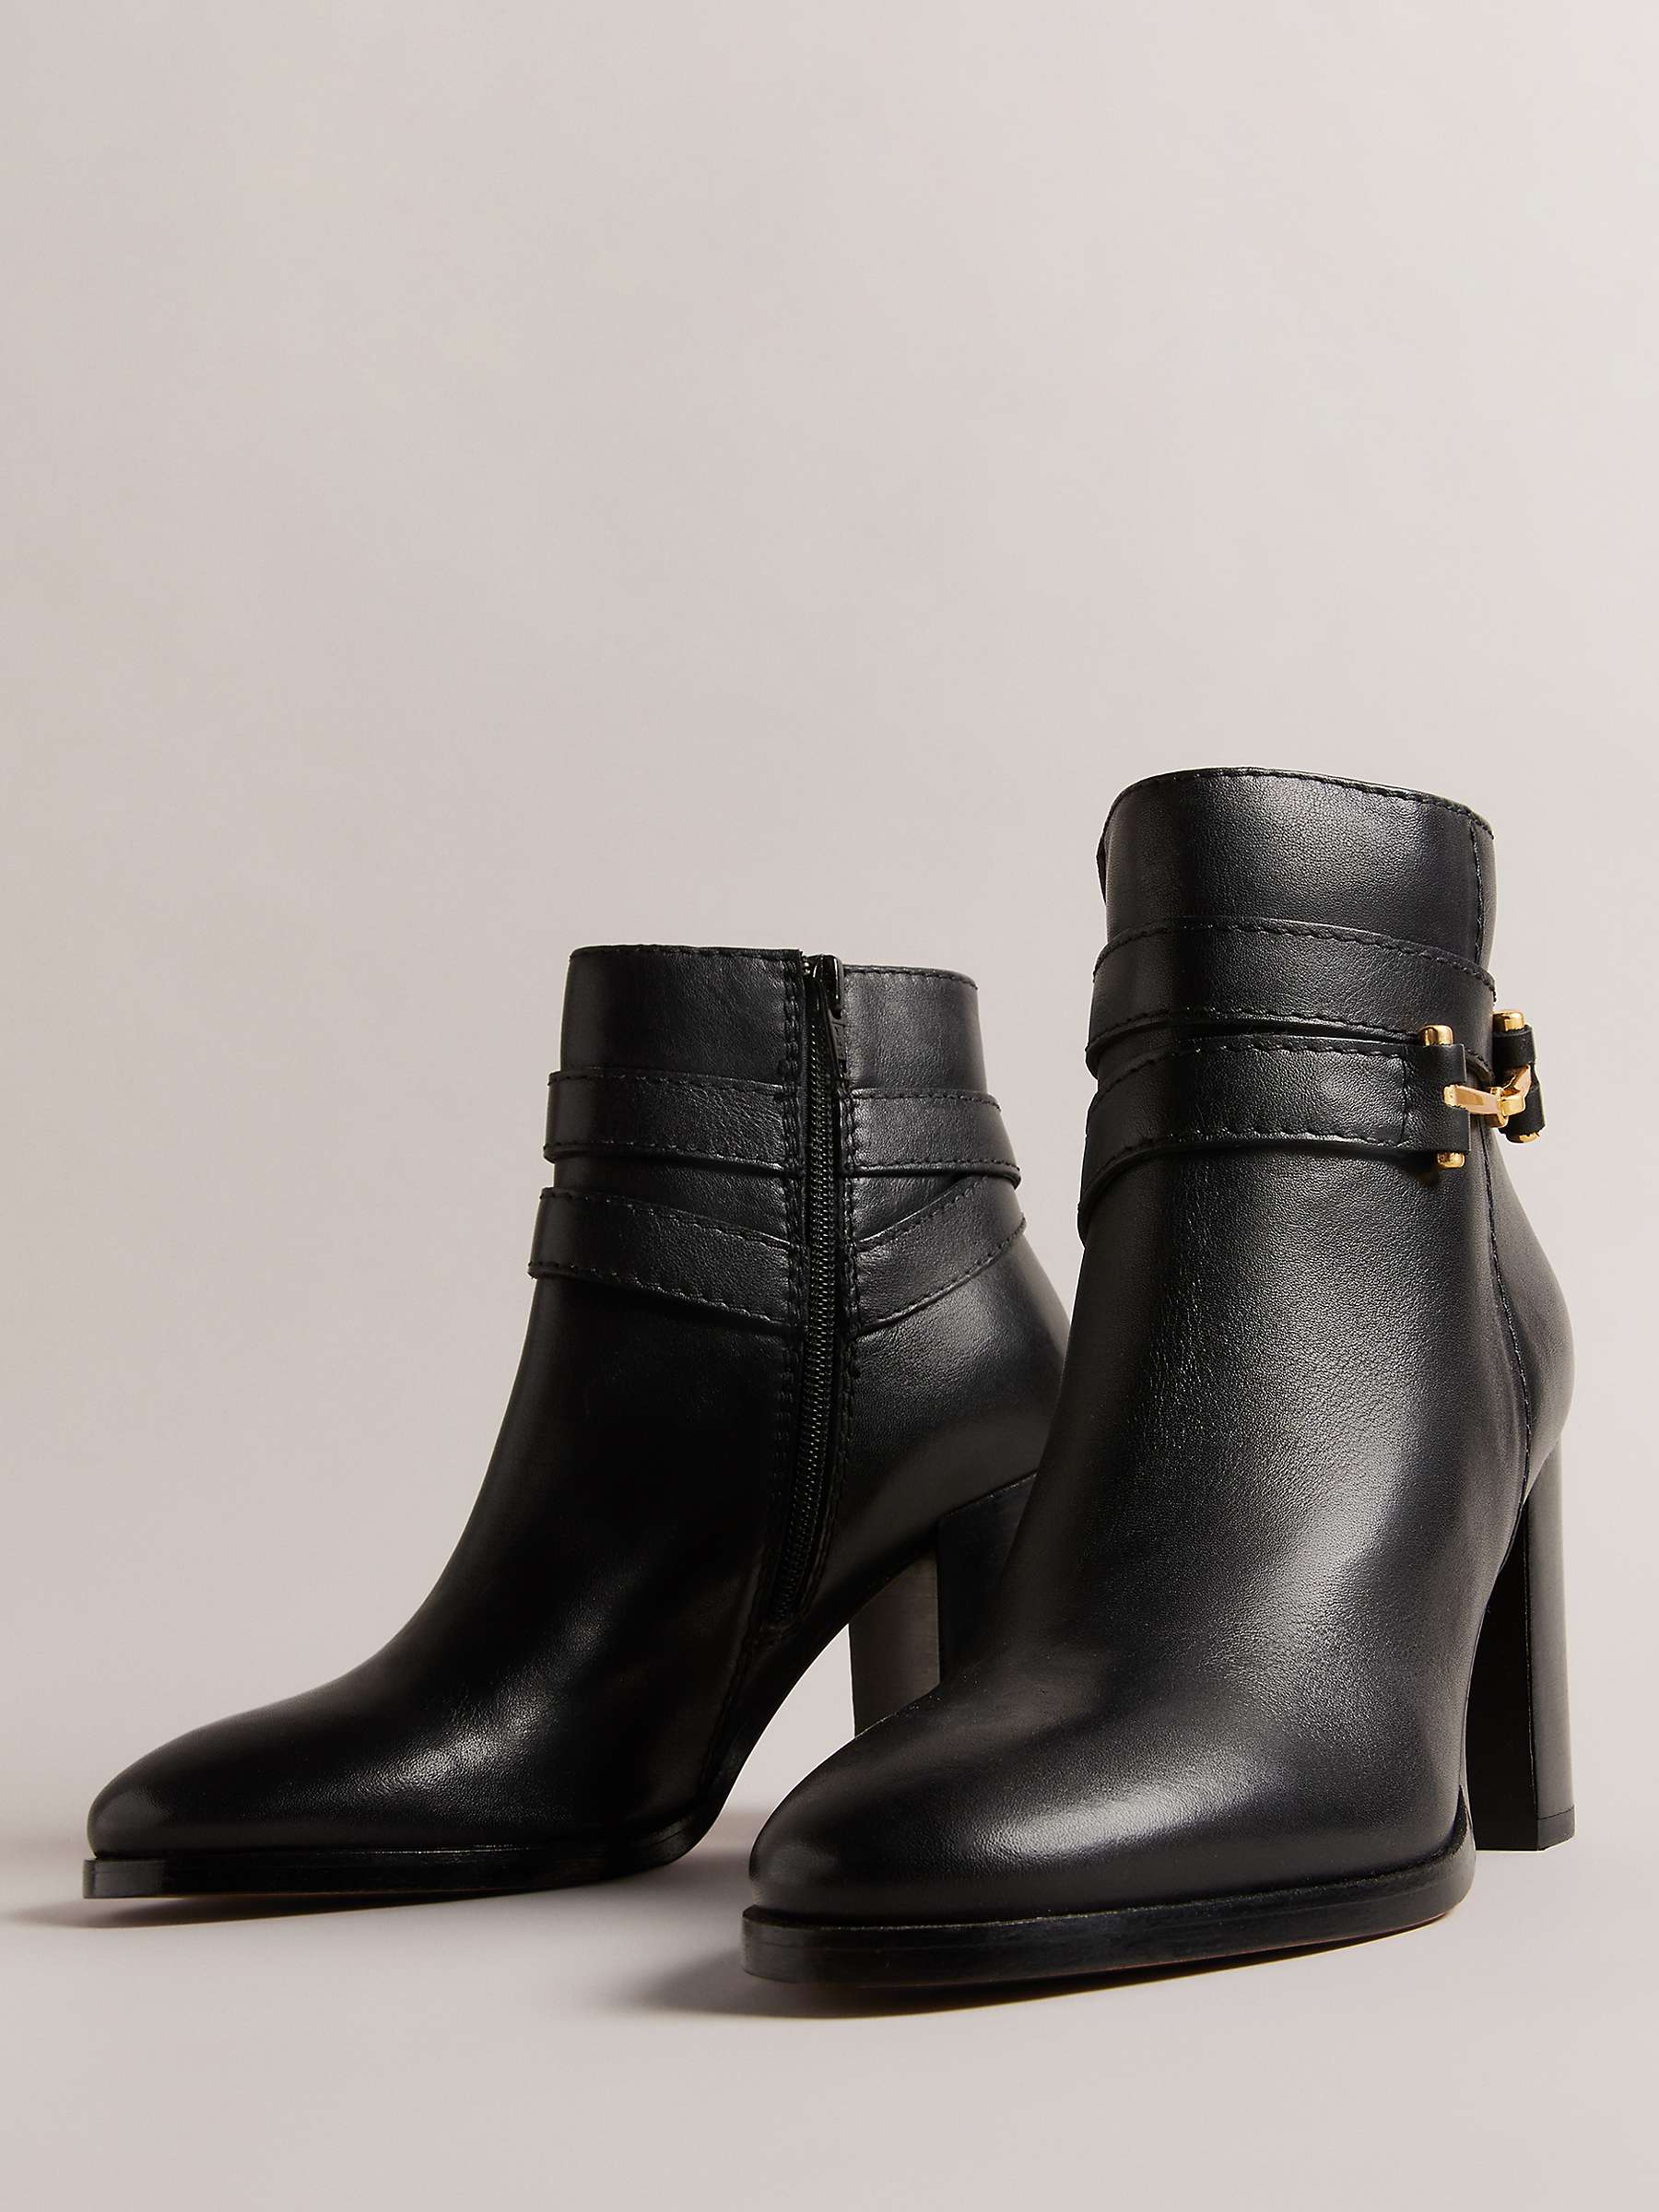 Buy Ted Baker Anisea High Block Heel Leather Ankle Boots Online at johnlewis.com